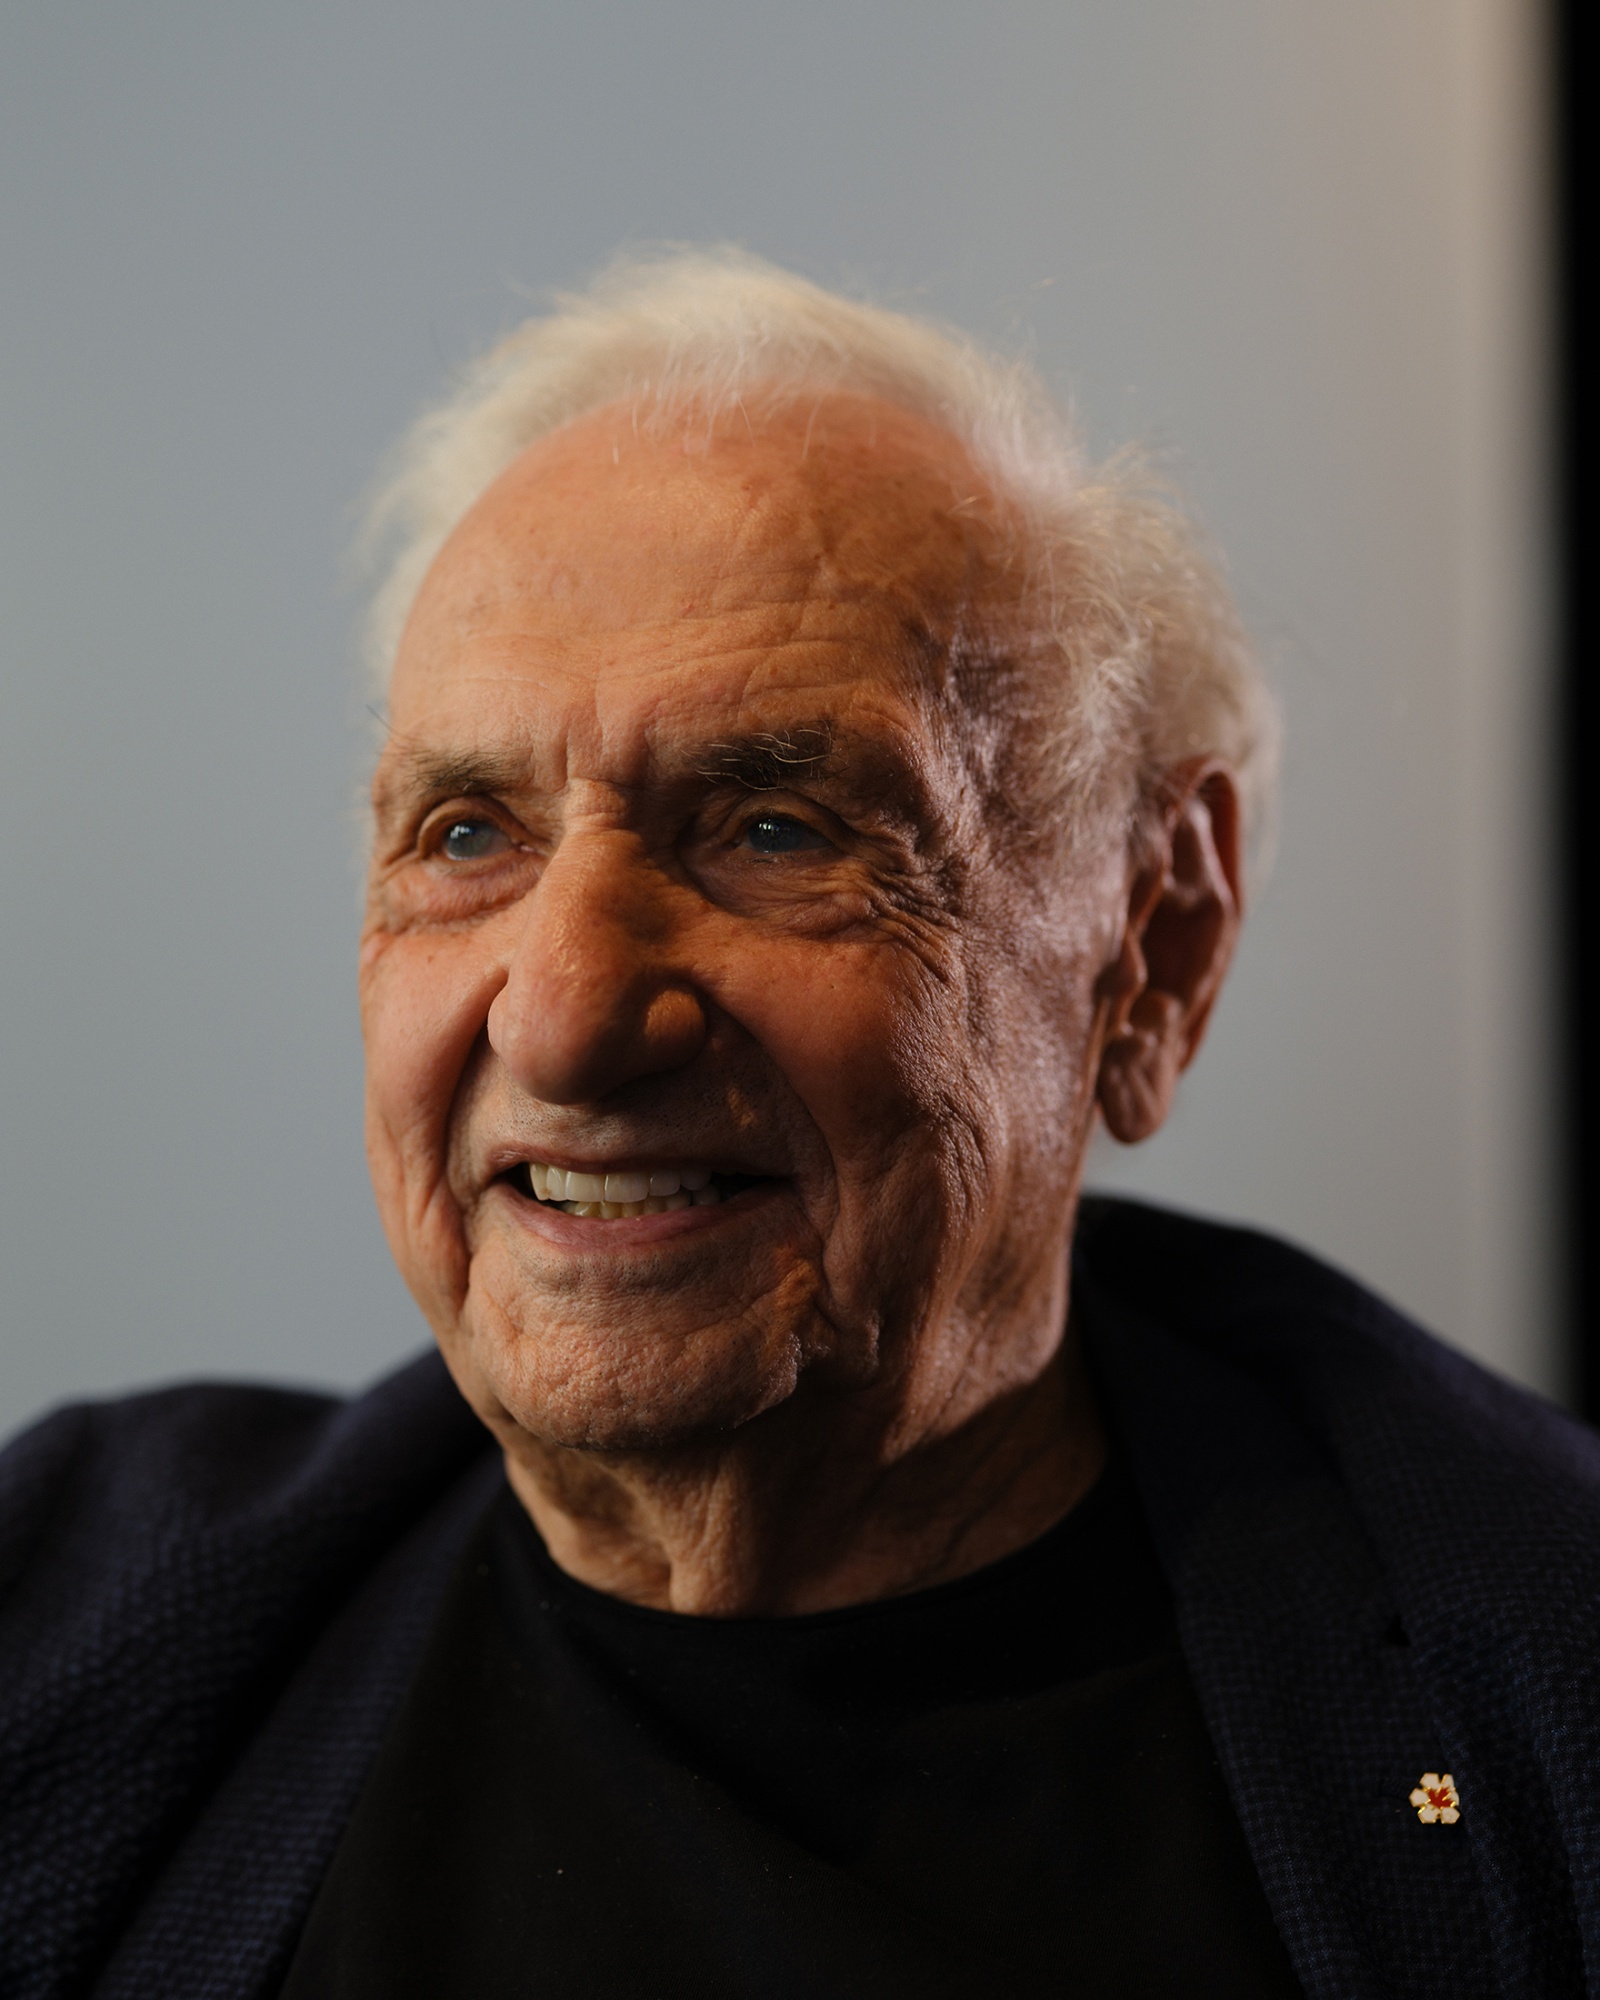 Frank Gehry returns to Canada to put his mark on the Toronto skyline